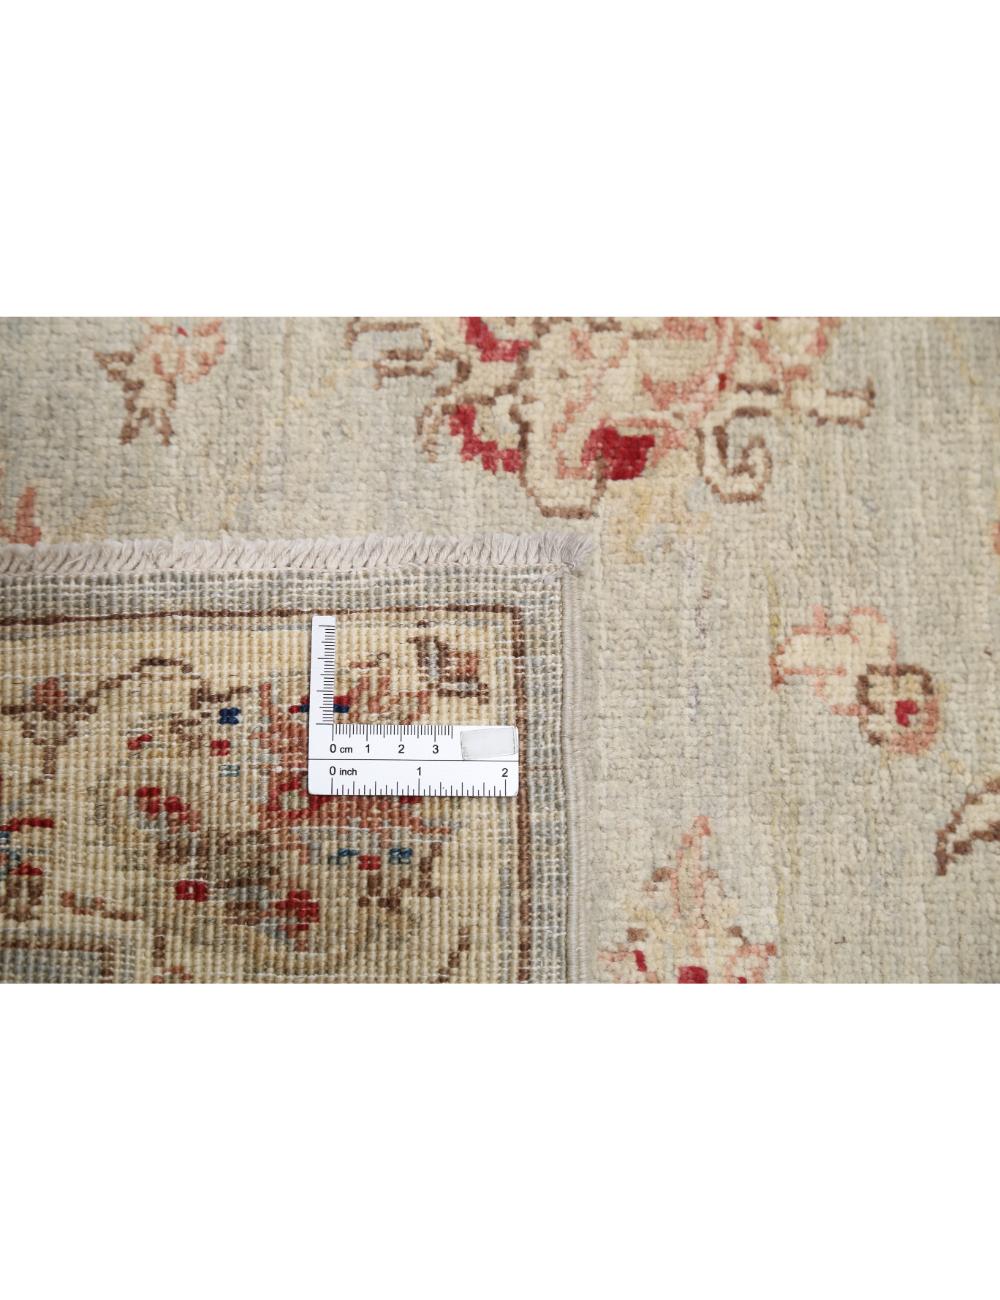 Ziegler 3' 0" X 4' 2" Hand-Knotted Wool Rug 3' 0" X 4' 2" (91 X 127) / Blue / Ivory